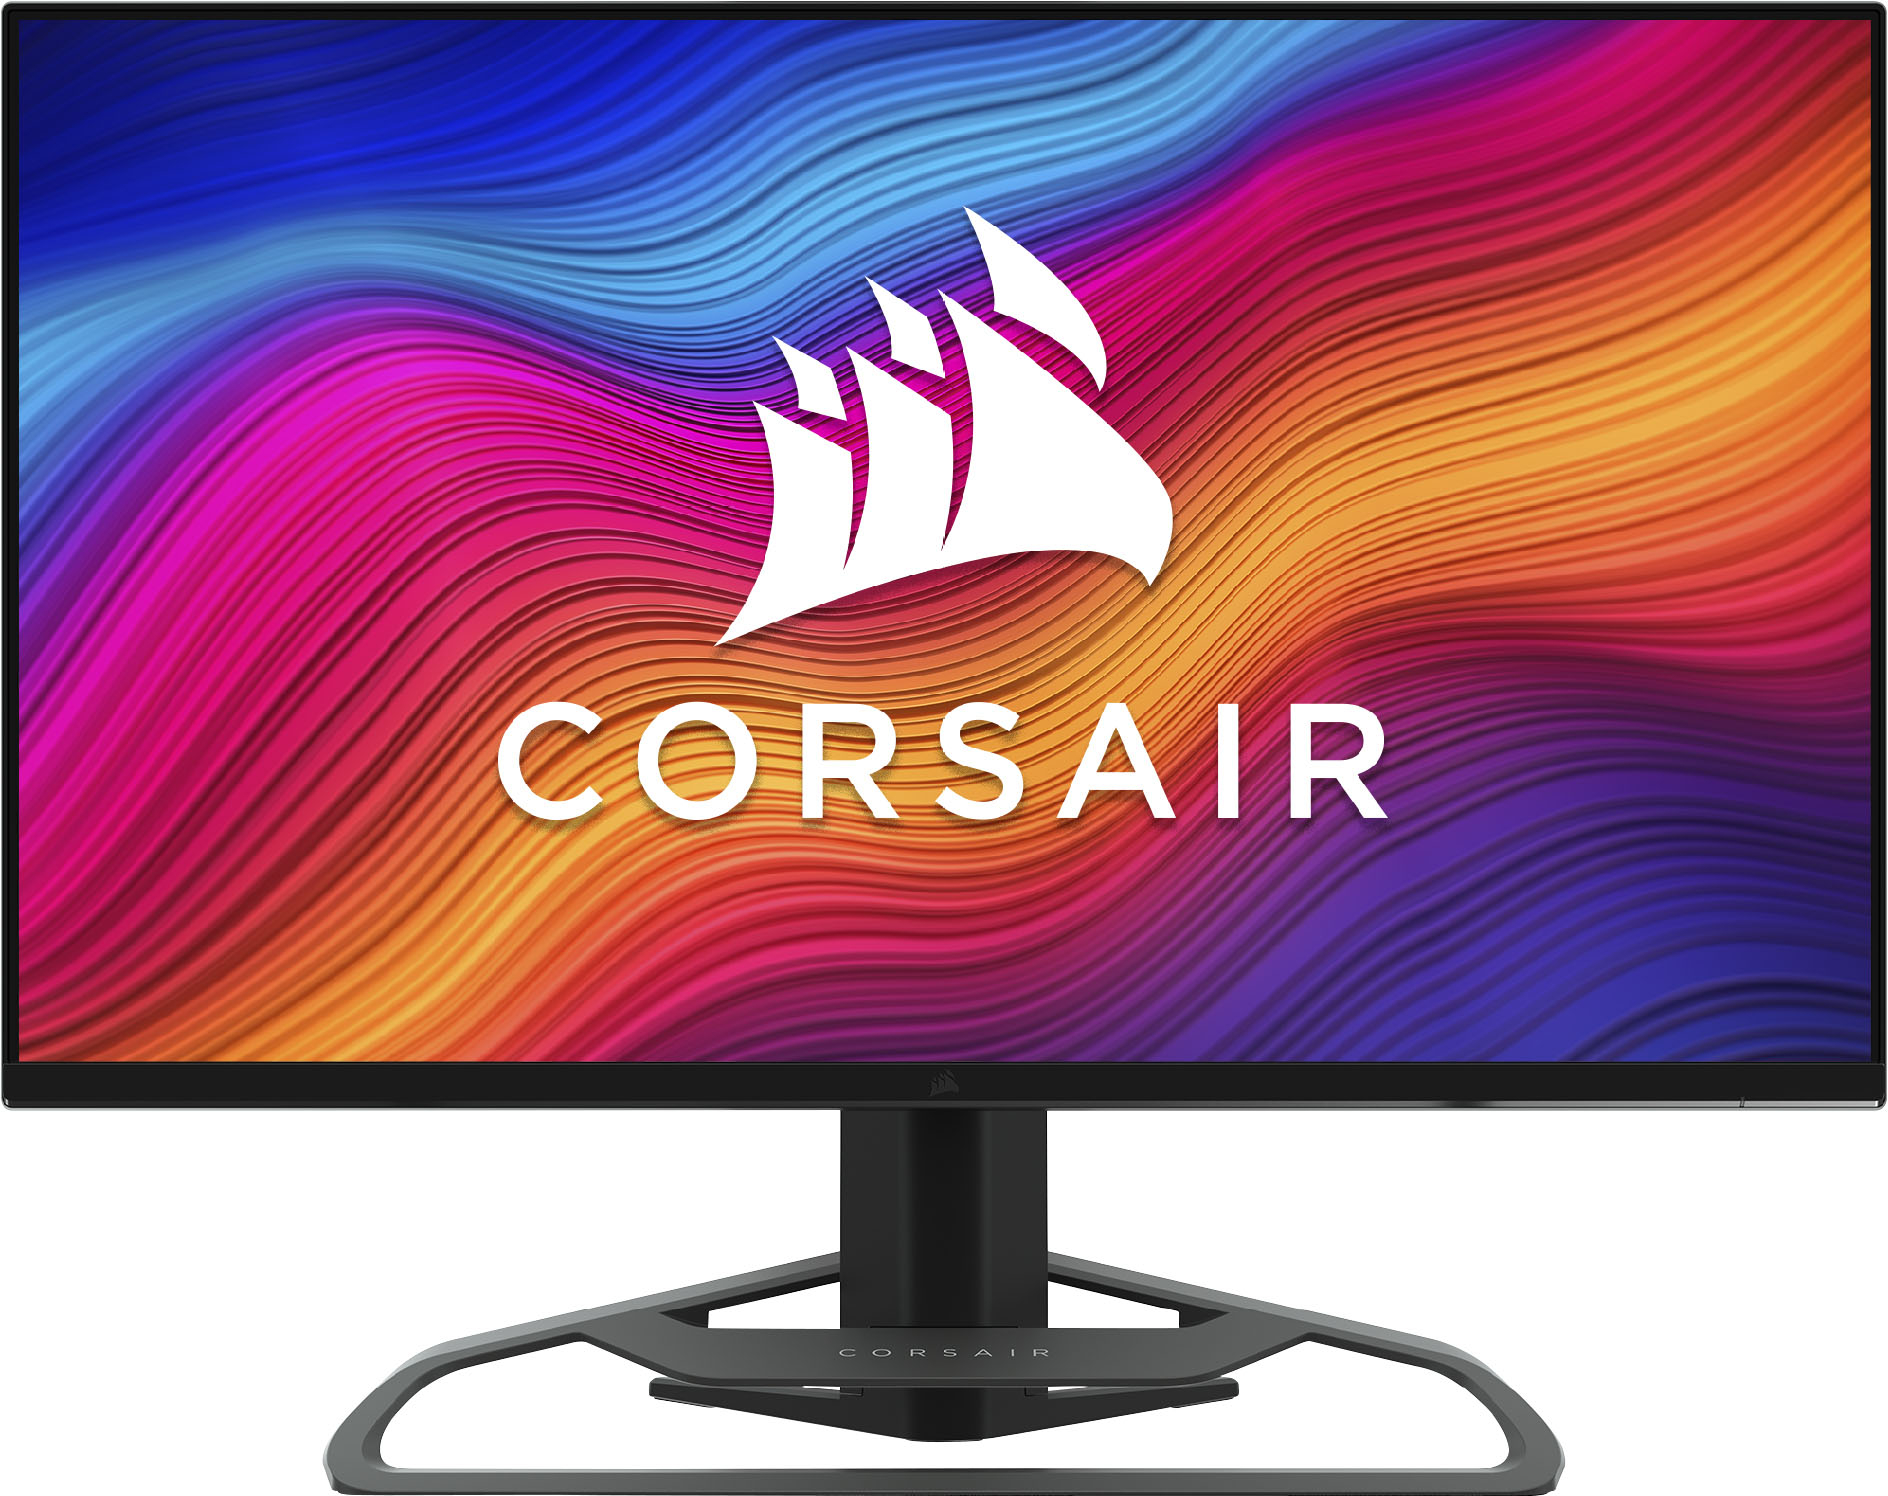 CORSAIR - XENEON 32QHD165 32” IPS LED QHD FreeSync Premium Monitor and G-Sync Compatible with HDR400 165Hz (DP, HDMI, and USB-C) - Black